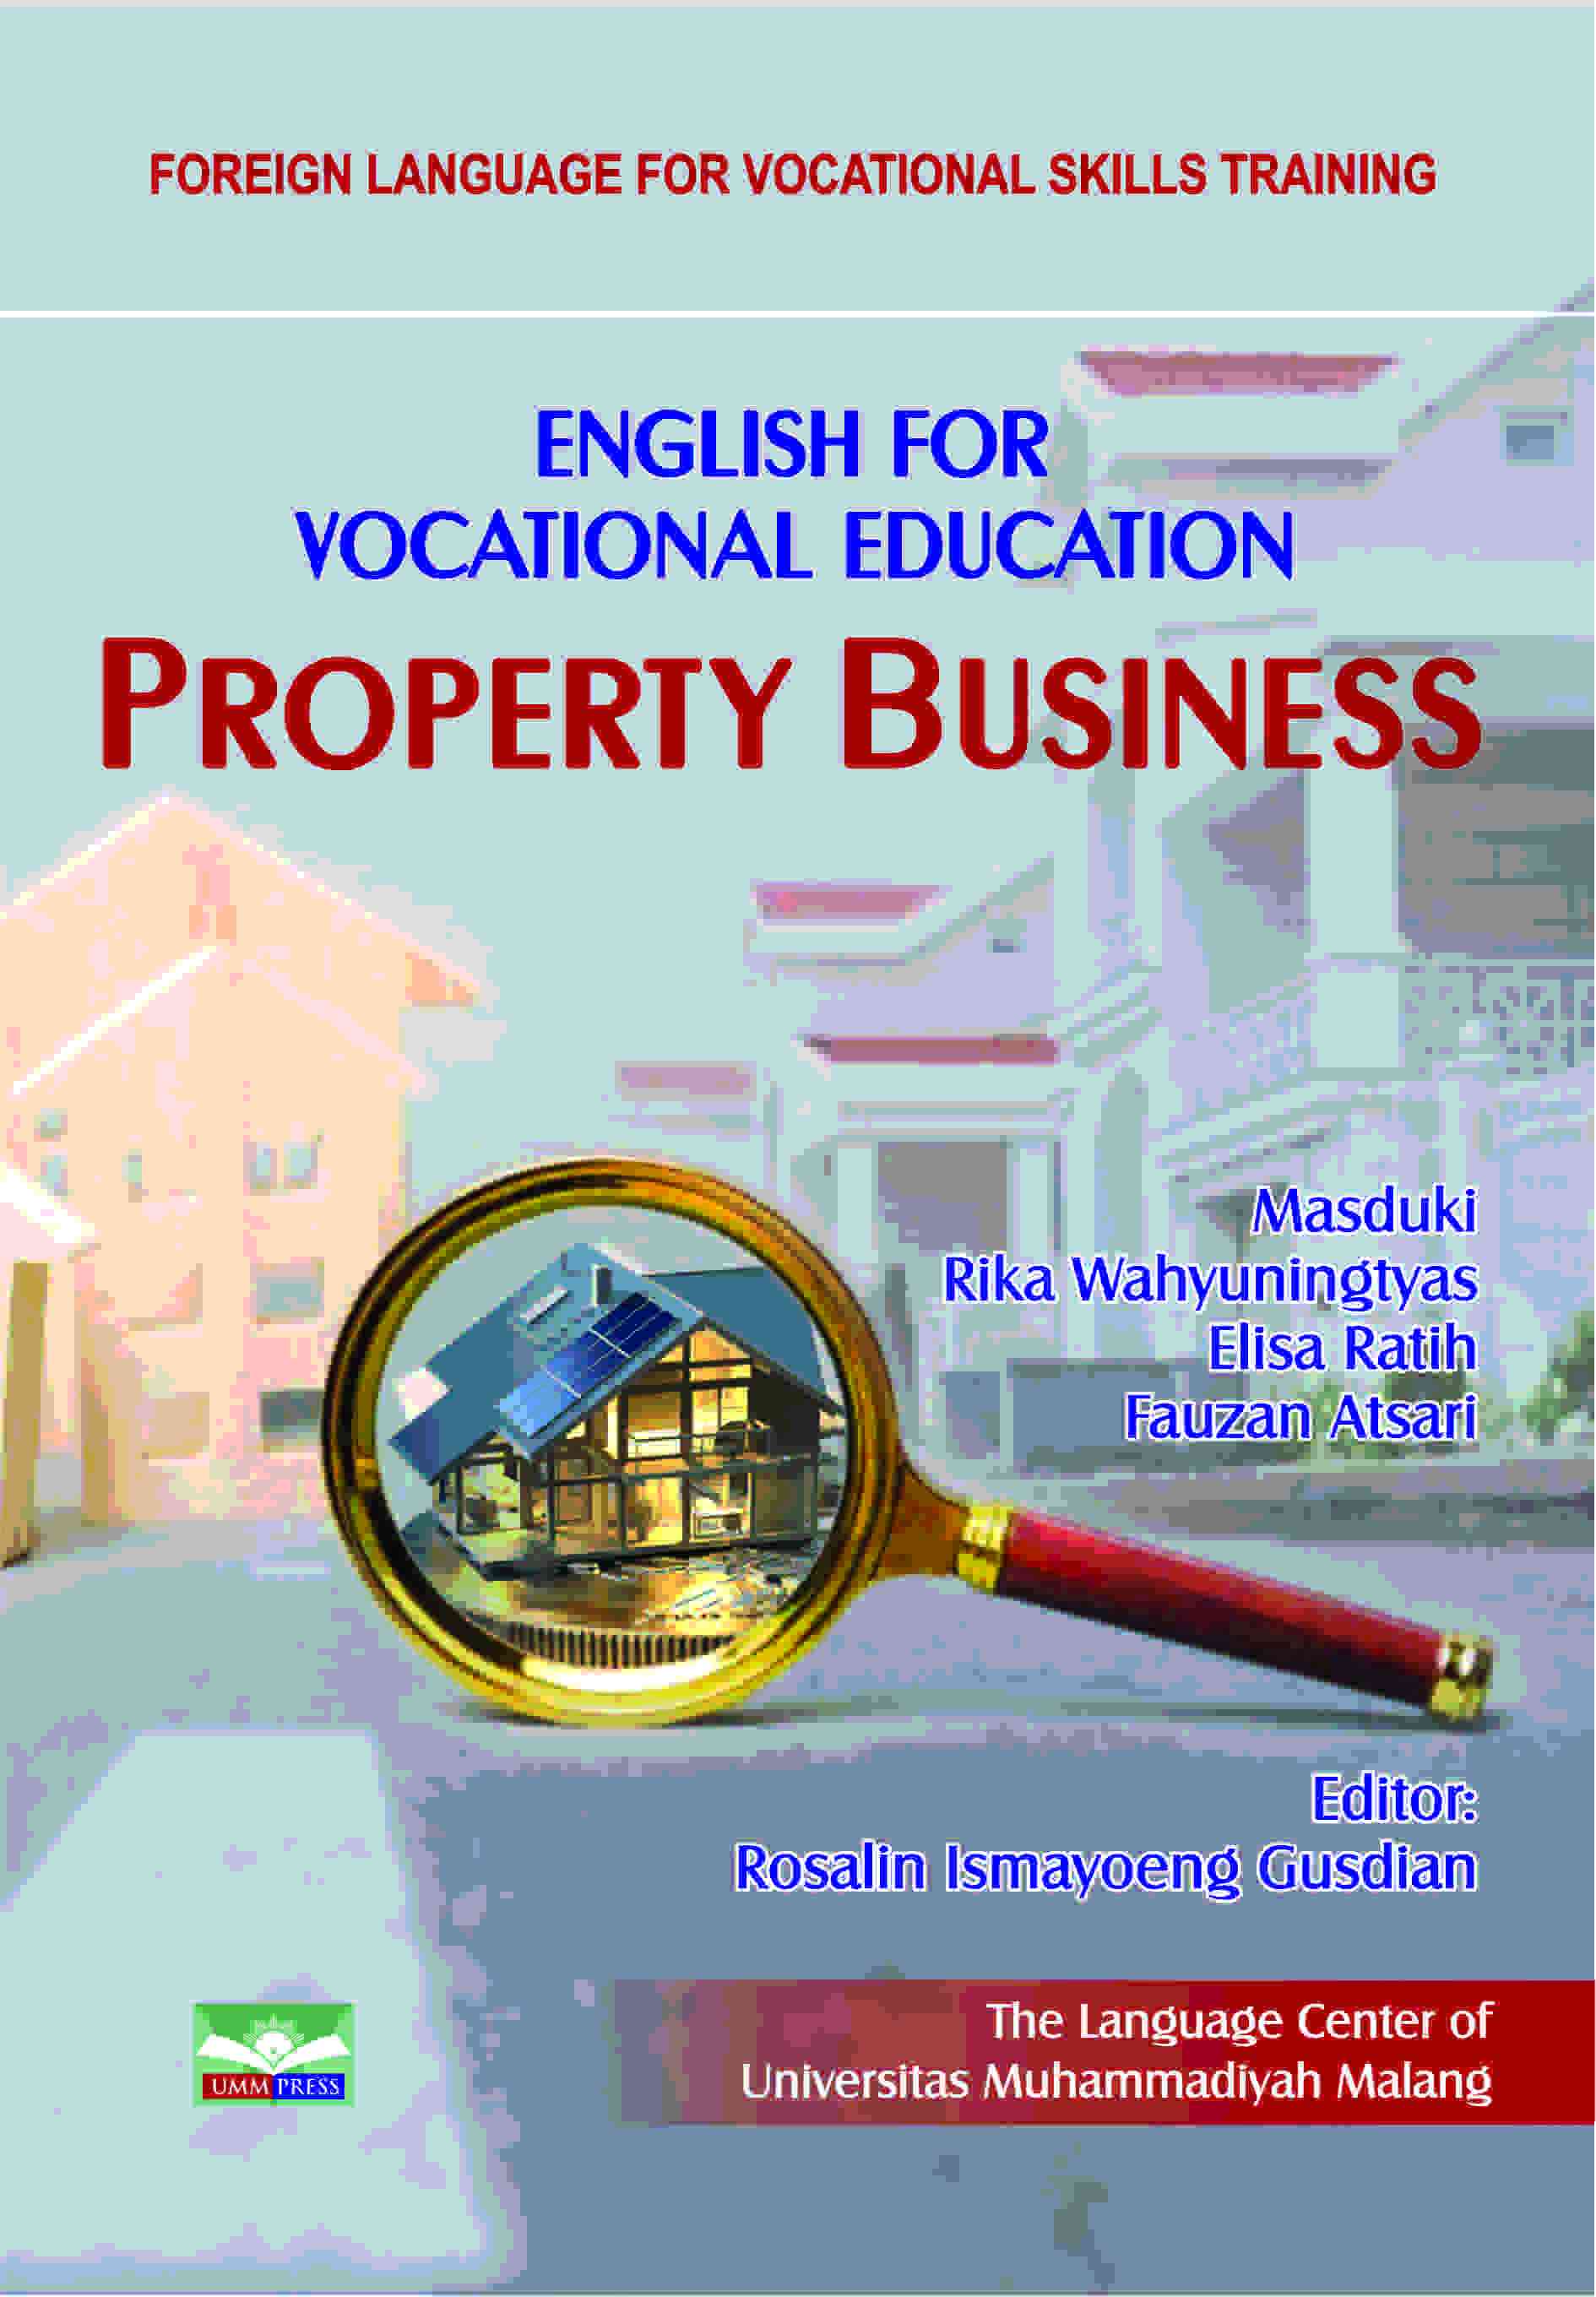 flvst-english-for-vocational-education-property-business